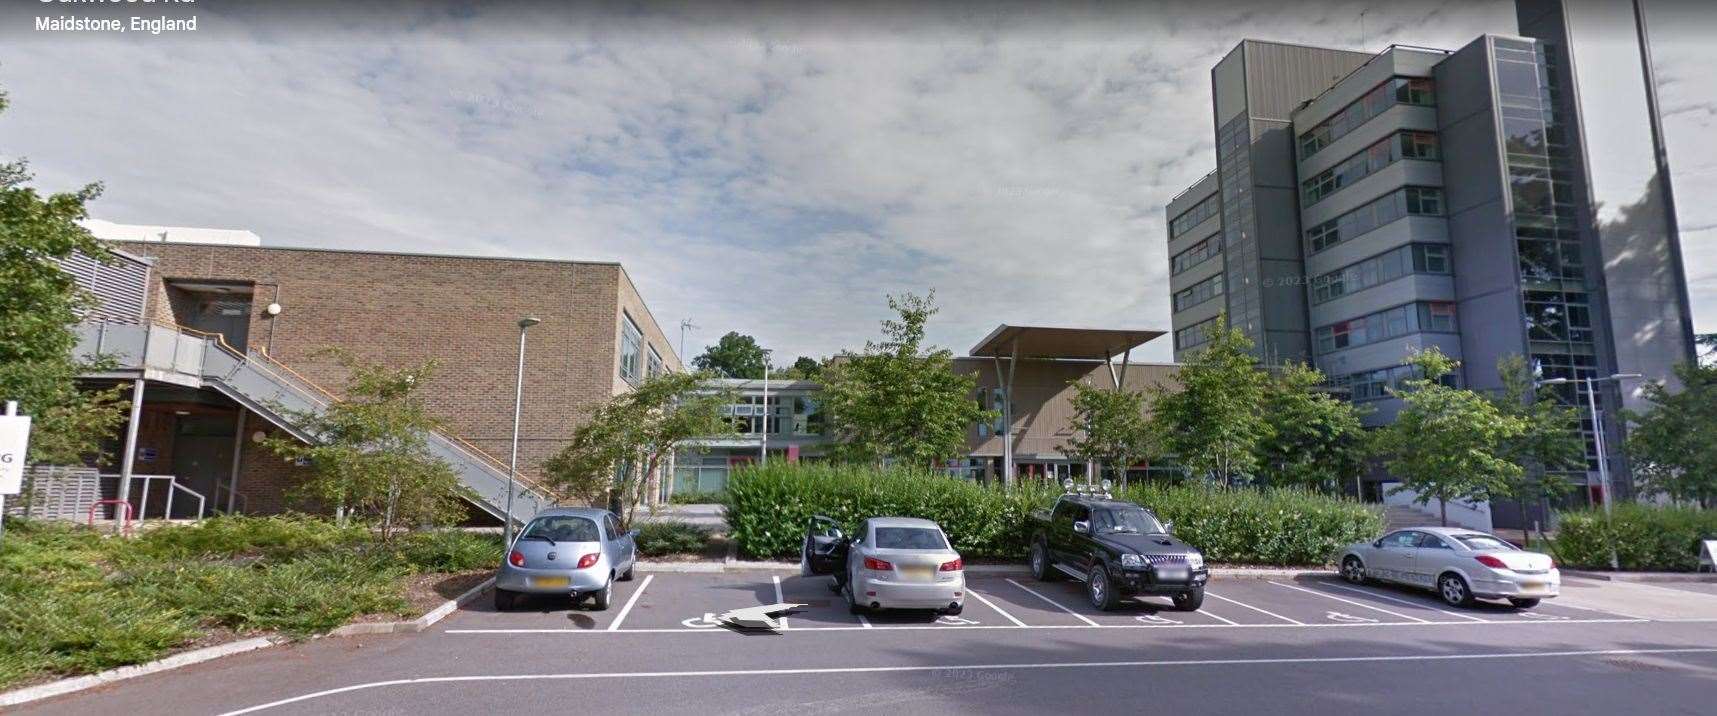 The new facility will be built at MidKent College's Maidstone campus. Photo credit: Google Earth